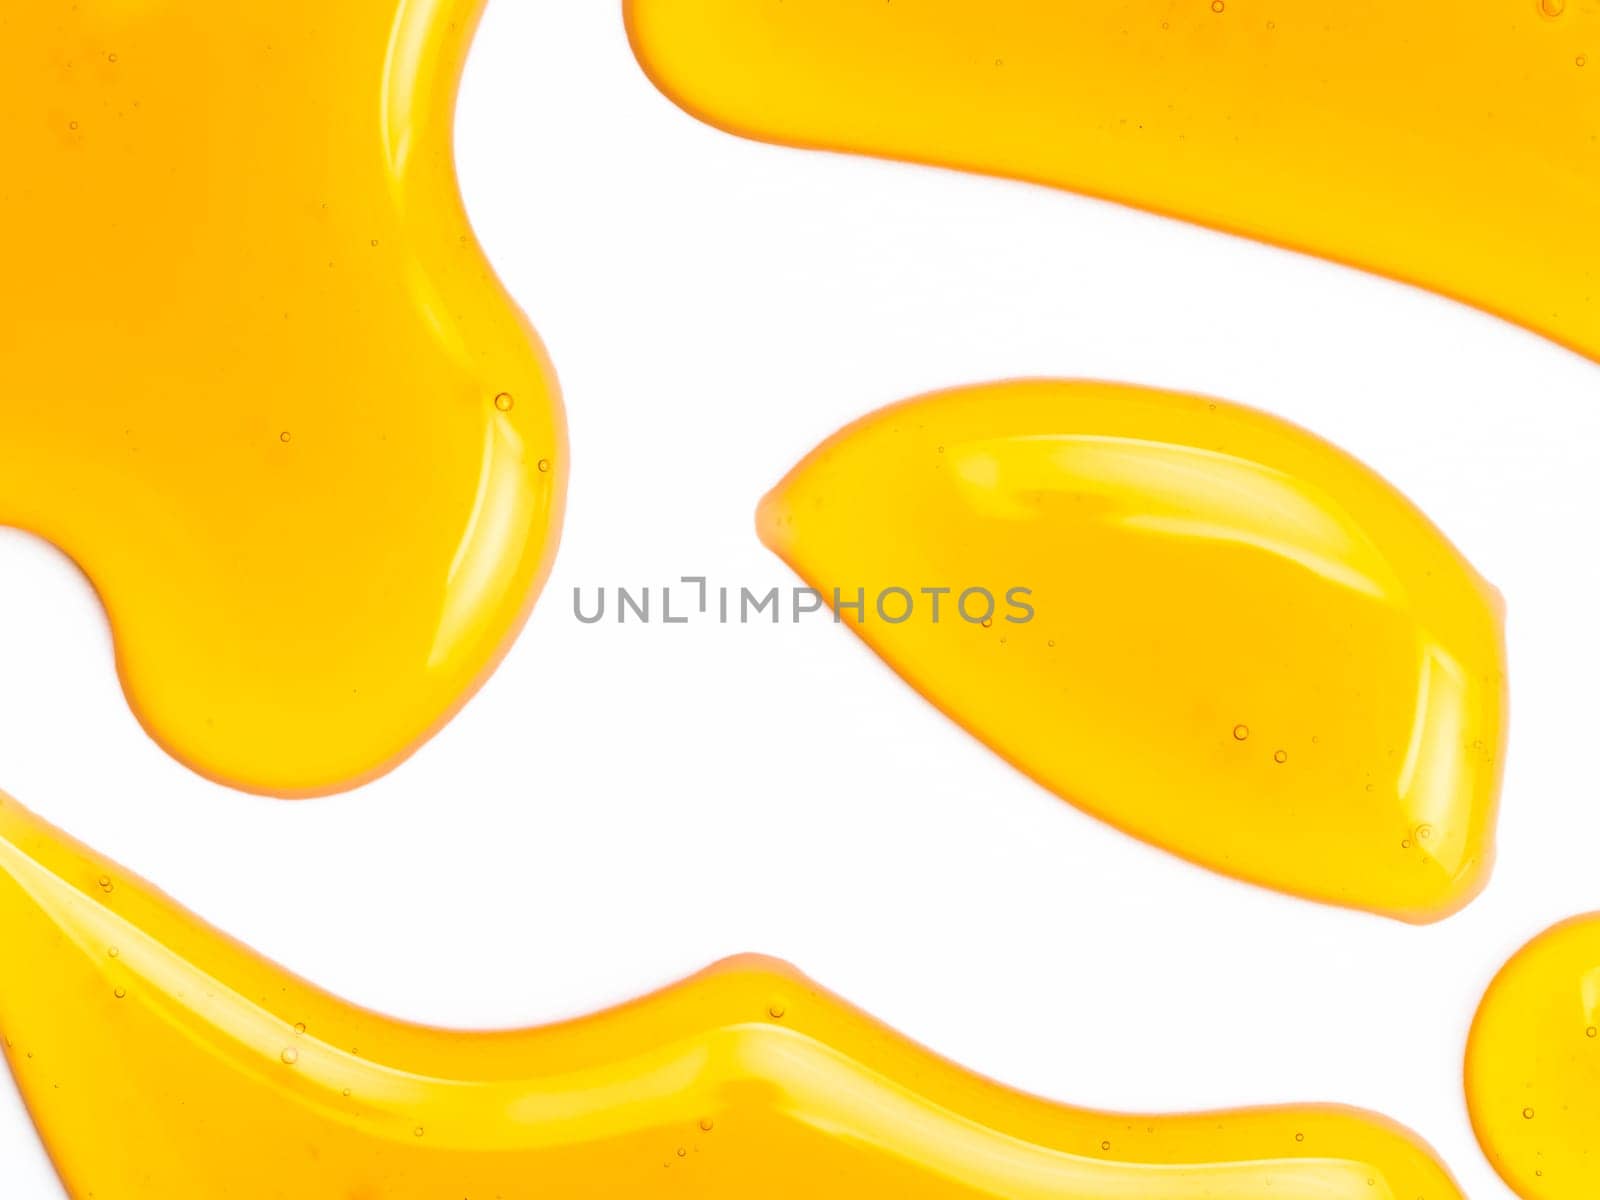 Honey drops. Abstract pattern from honey drops. Isolated on white with clipping path. Can use for design. Copy space for text.